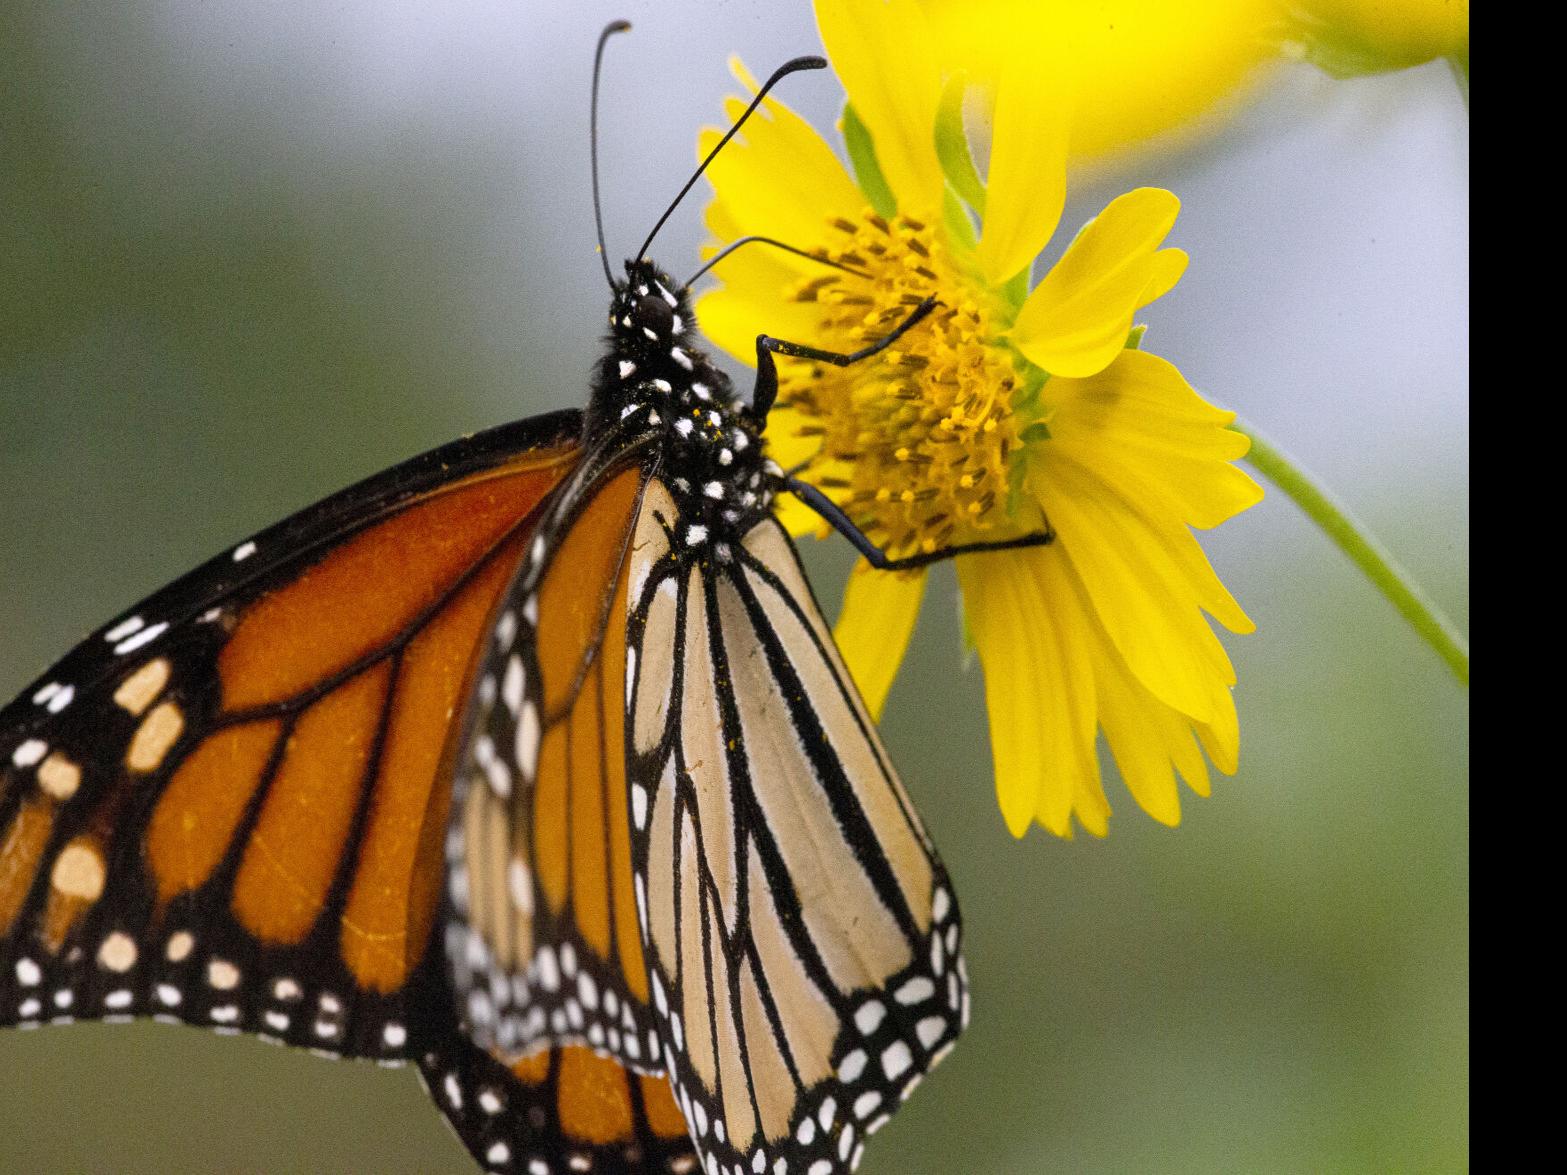 Want a monarch butterfly garden? Now's your chance - The San Diego